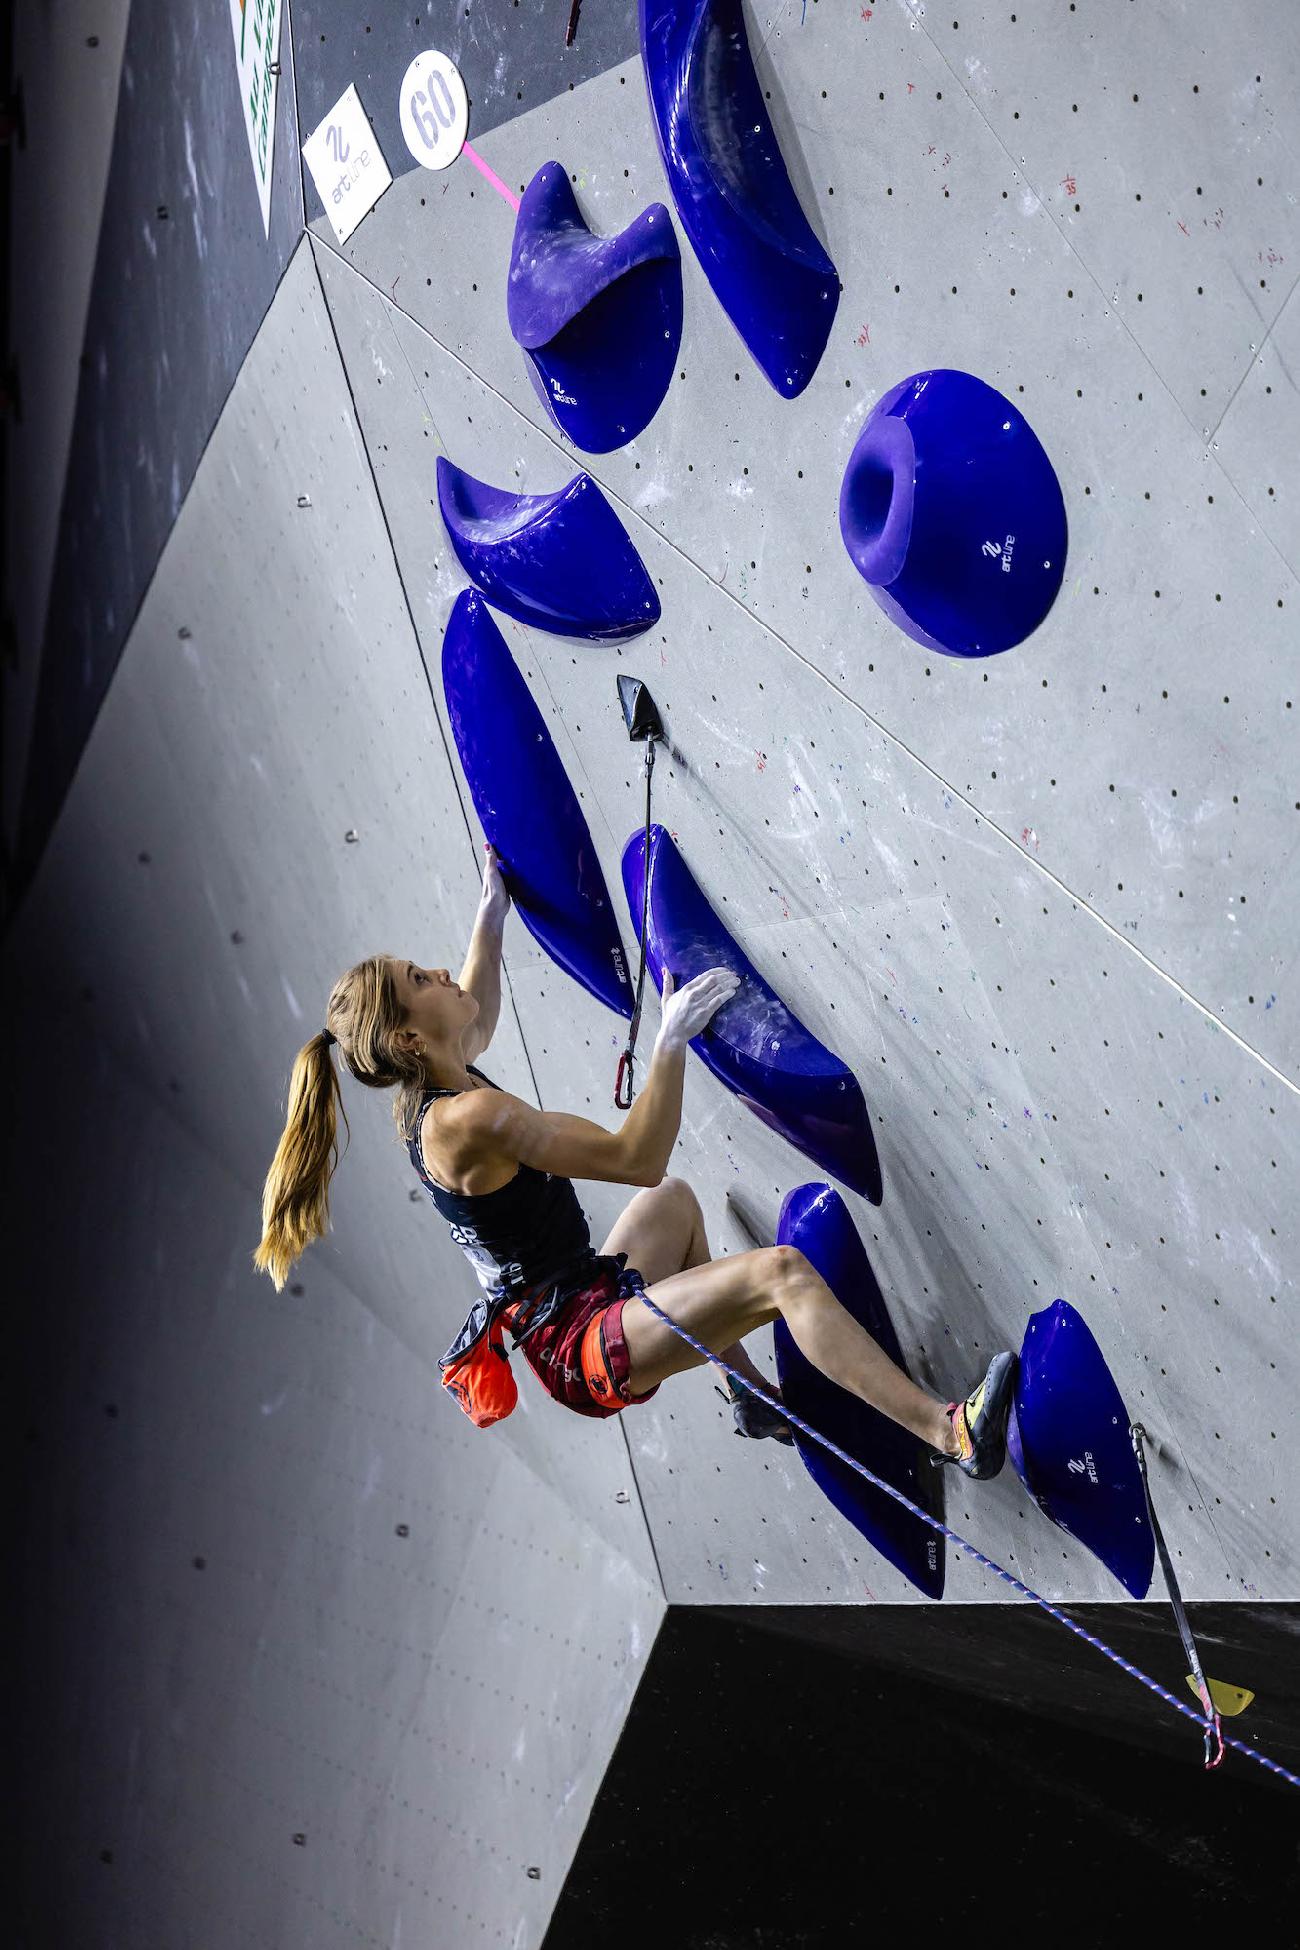 European Boulder & Lead Olympic Qualification Laval